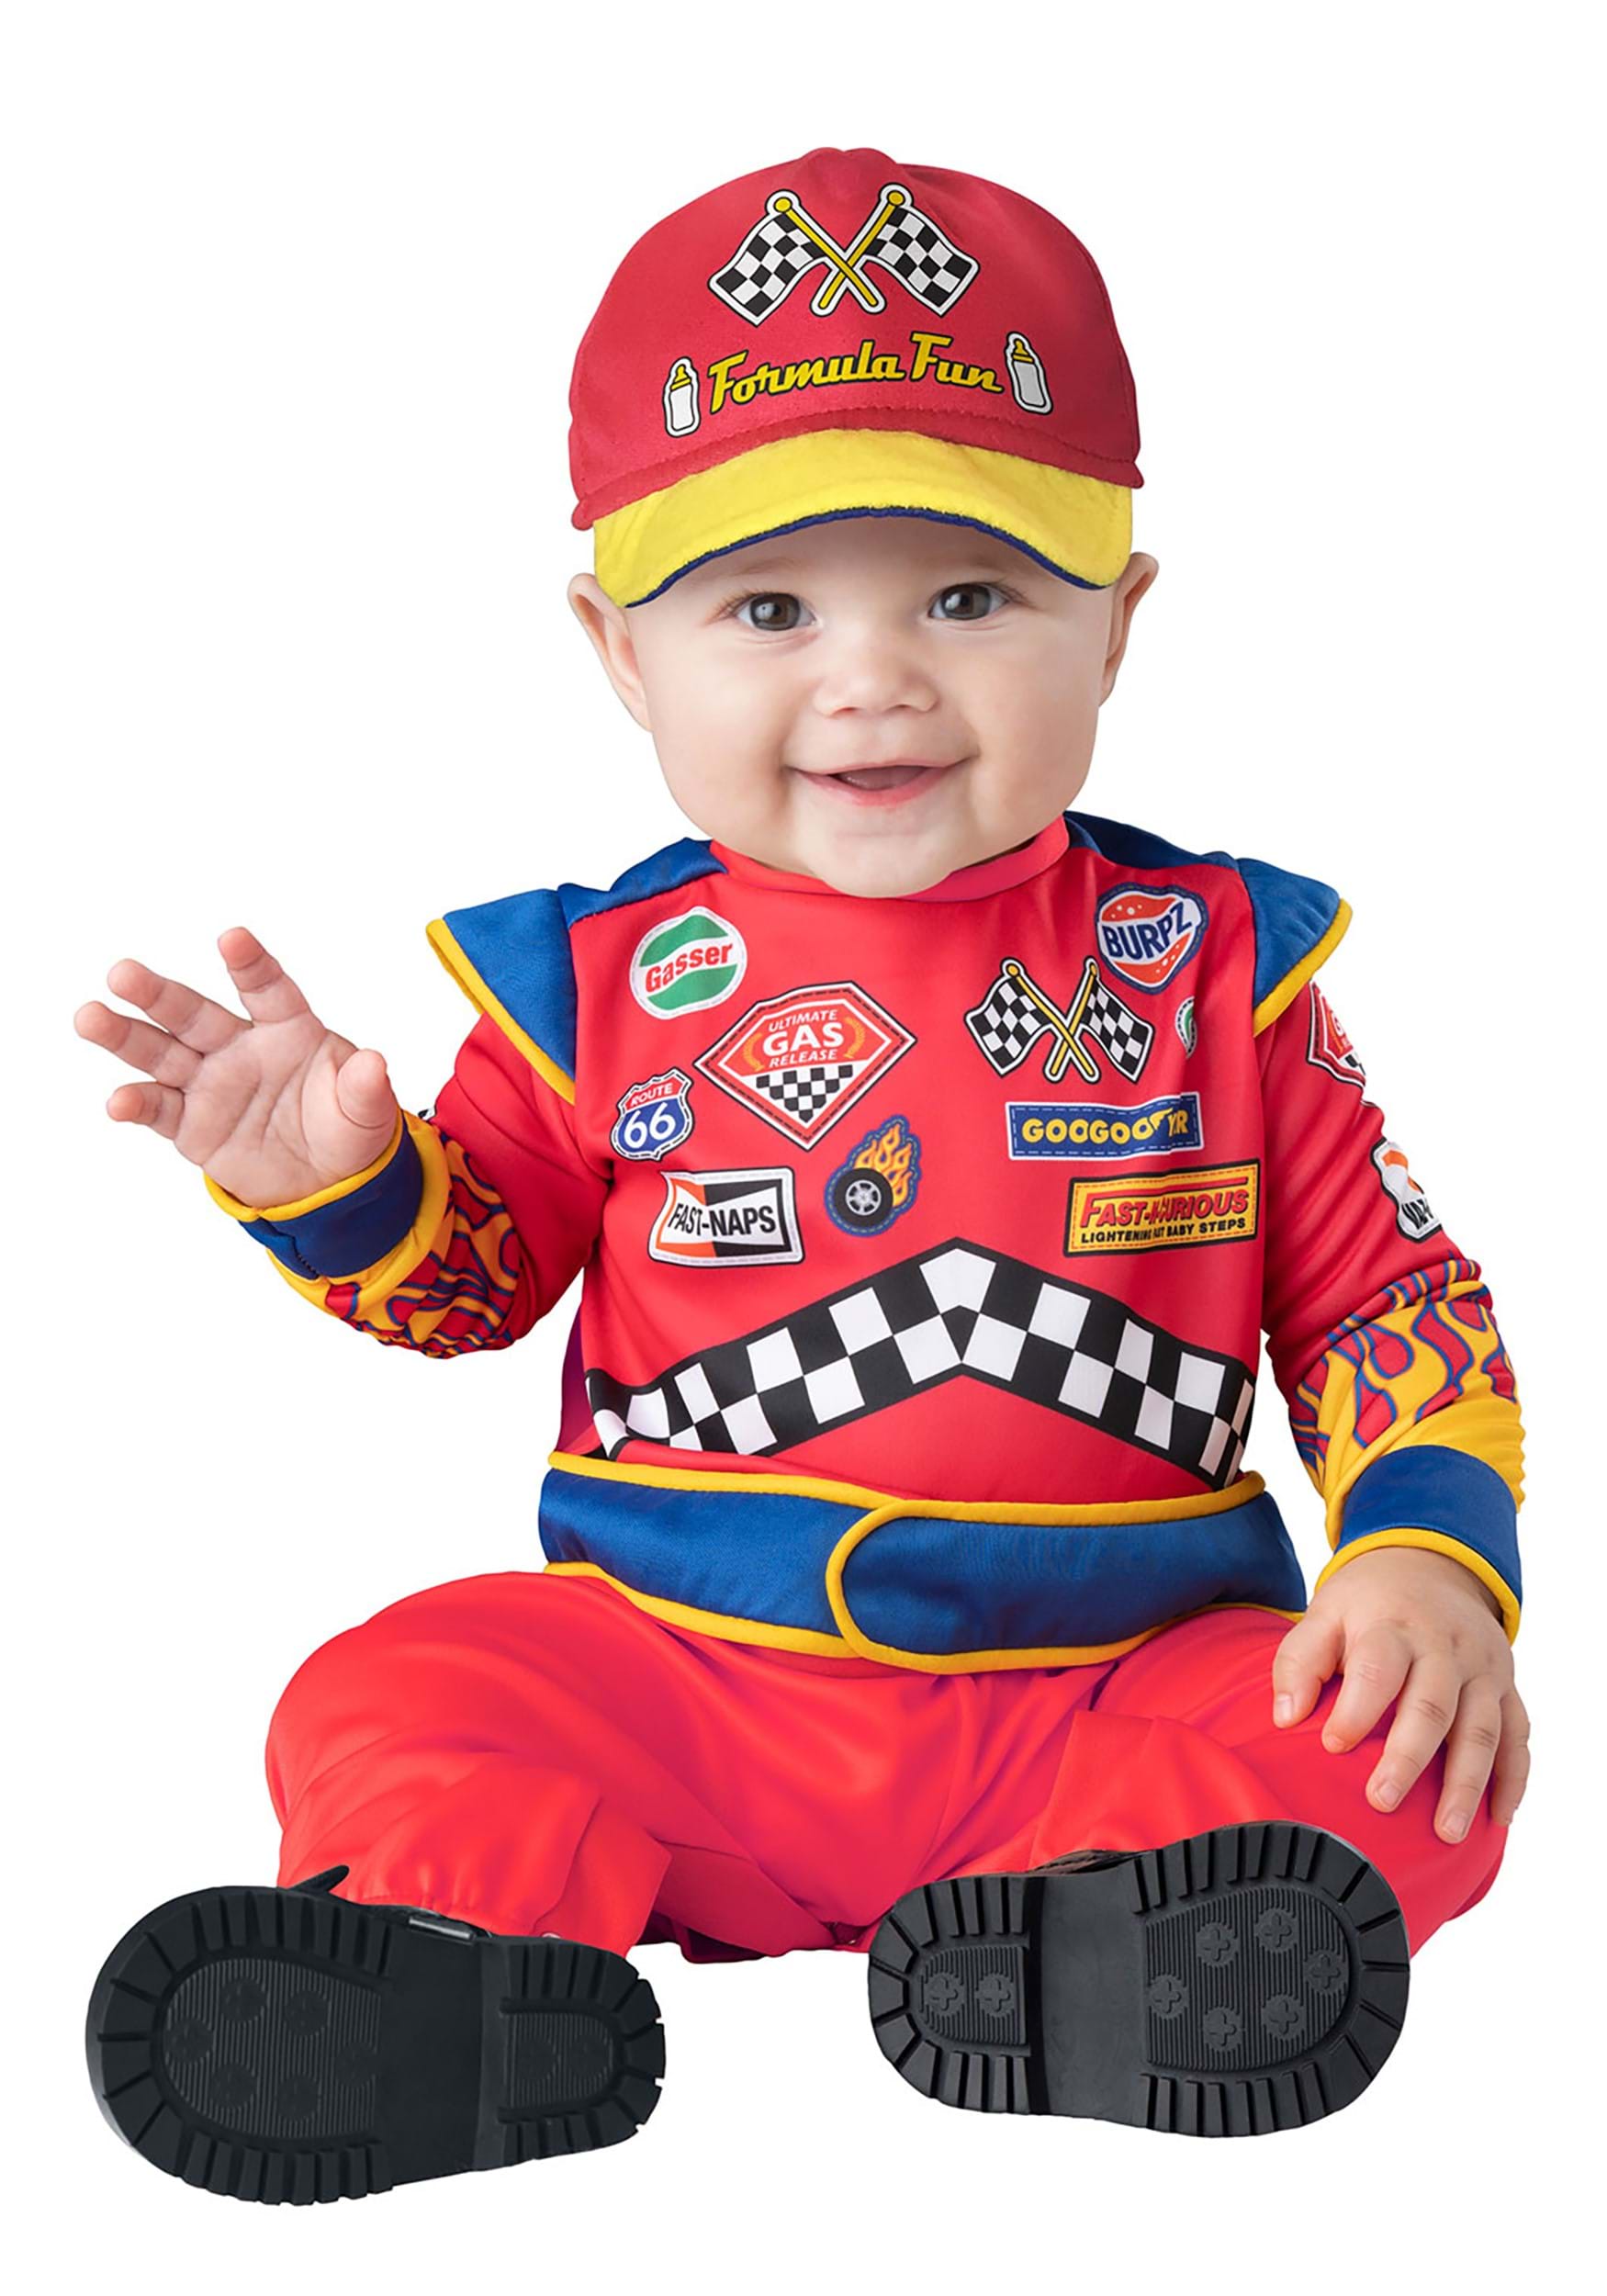 Photos - Fancy Dress Fun World Burnin' Rubber Costume for Infants | Infant Costumes Blue/Or